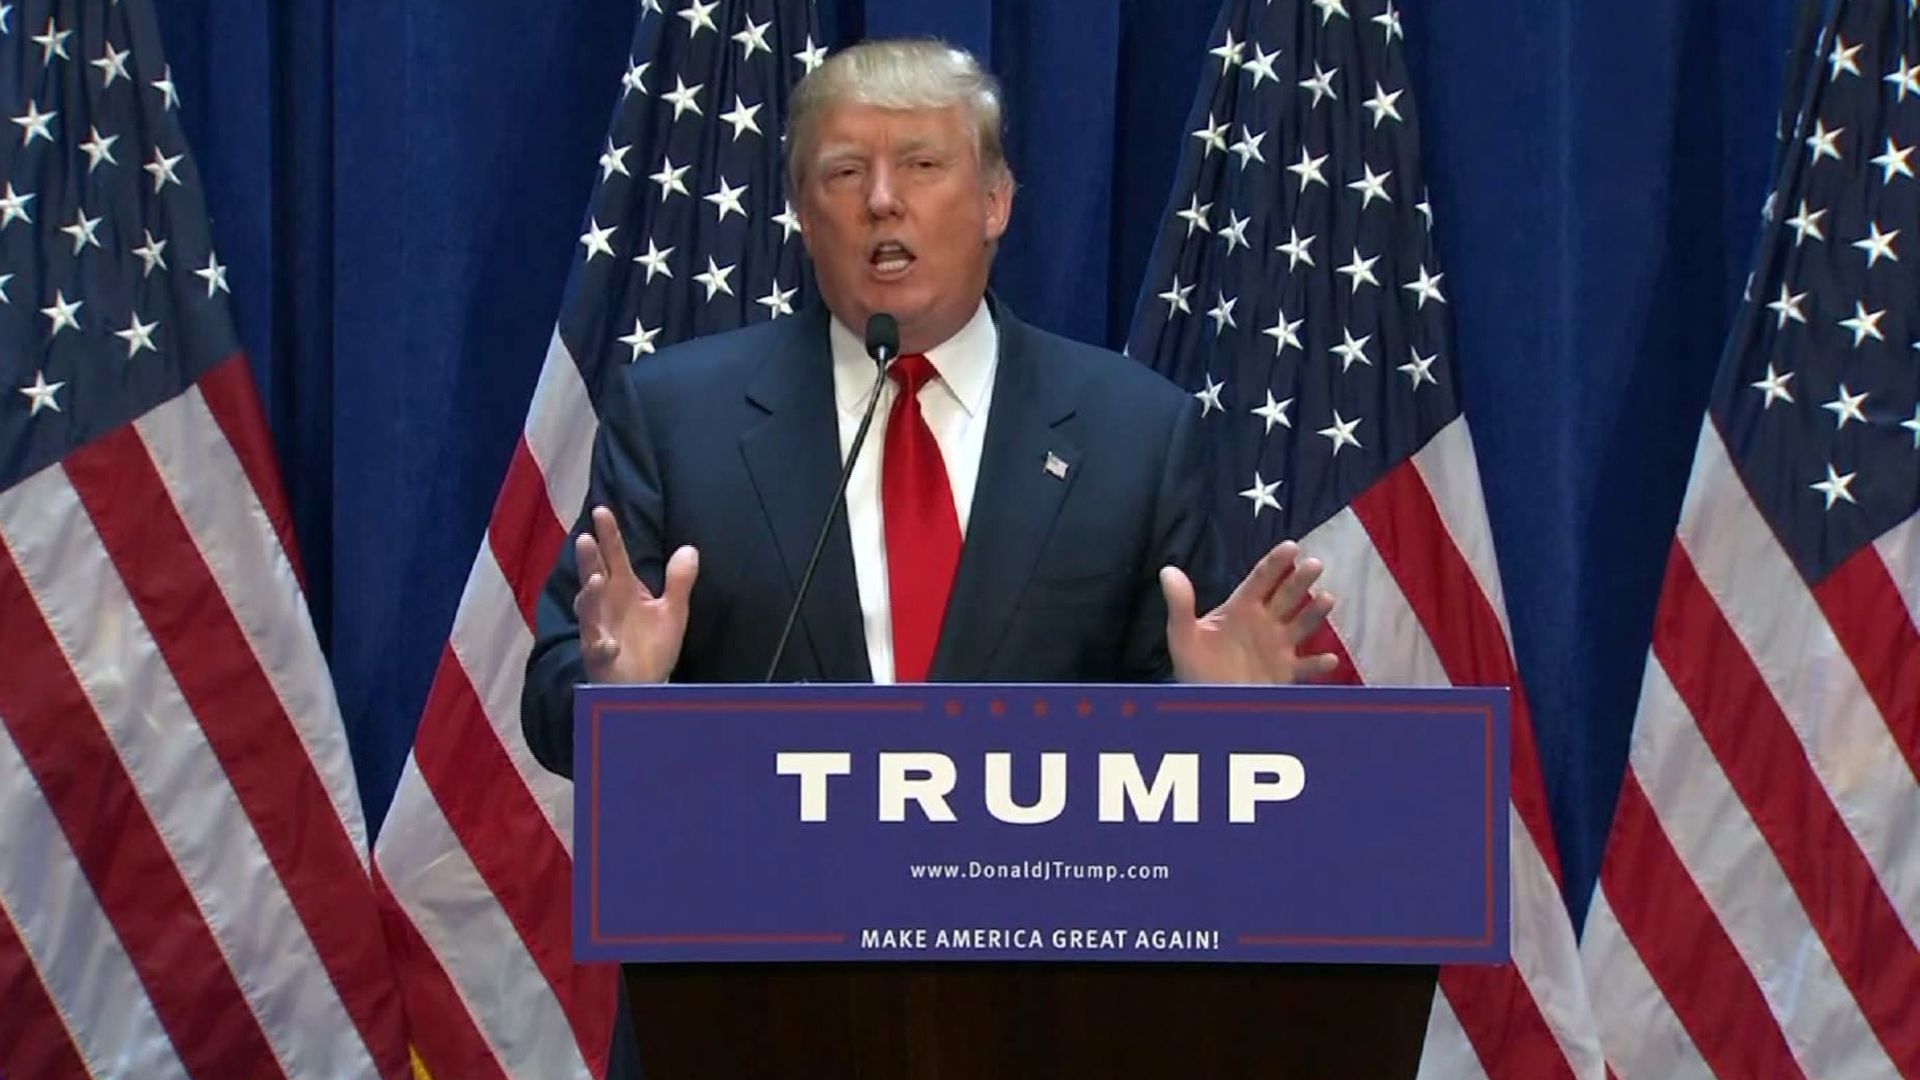 Real Estate Mogul Donald Trump Announces Candidacy for President